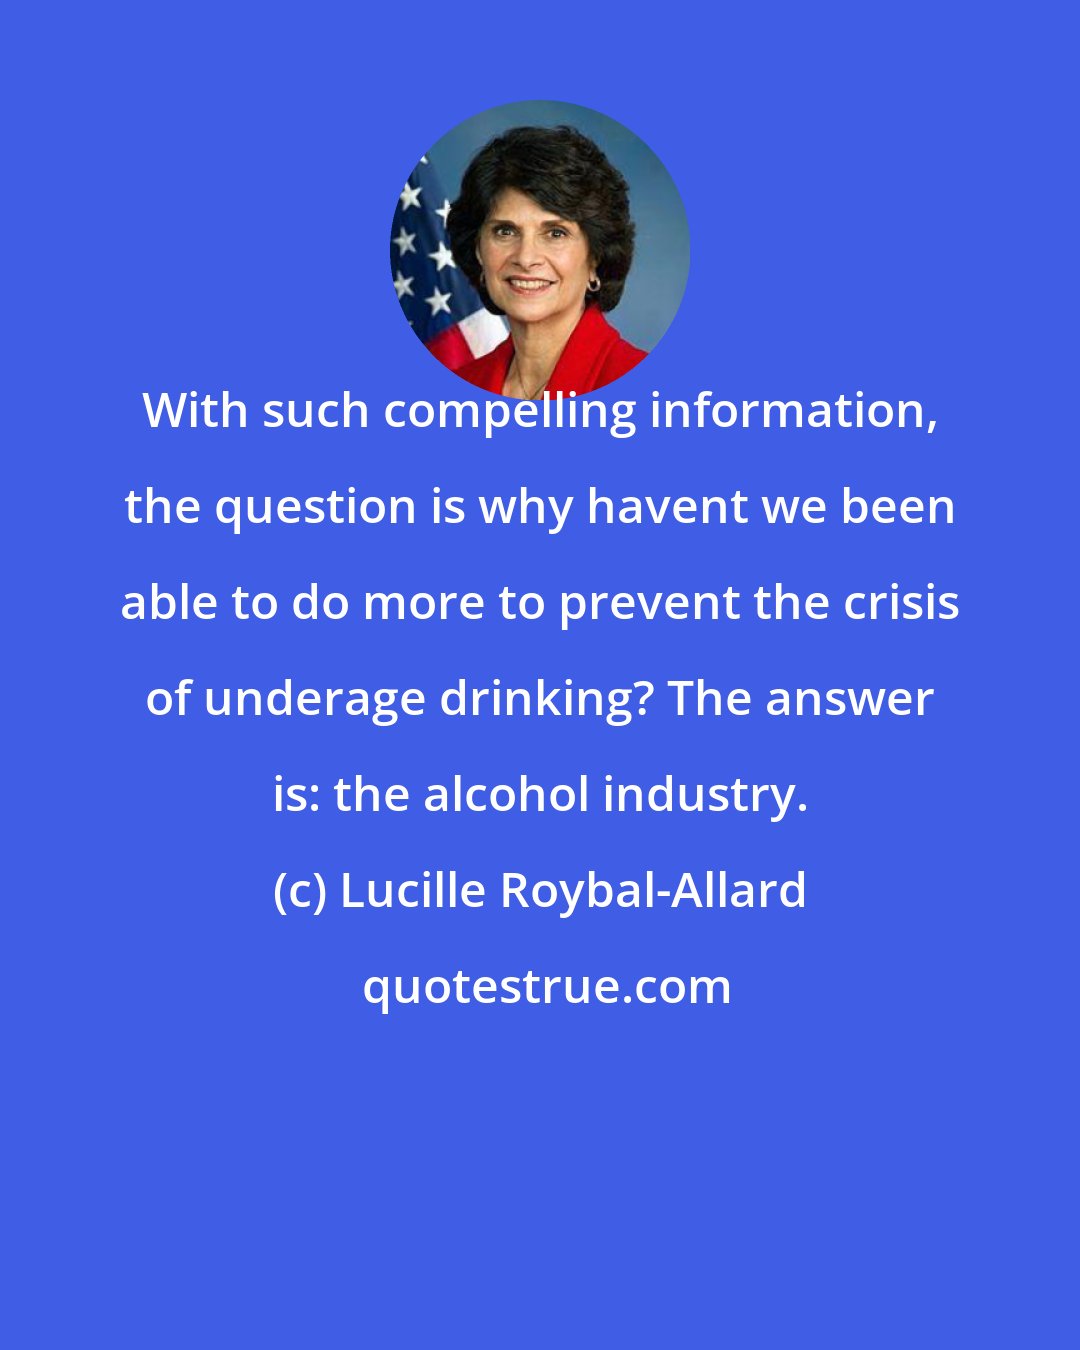 Lucille Roybal-Allard: With such compelling information, the question is why havent we been able to do more to prevent the crisis of underage drinking? The answer is: the alcohol industry.